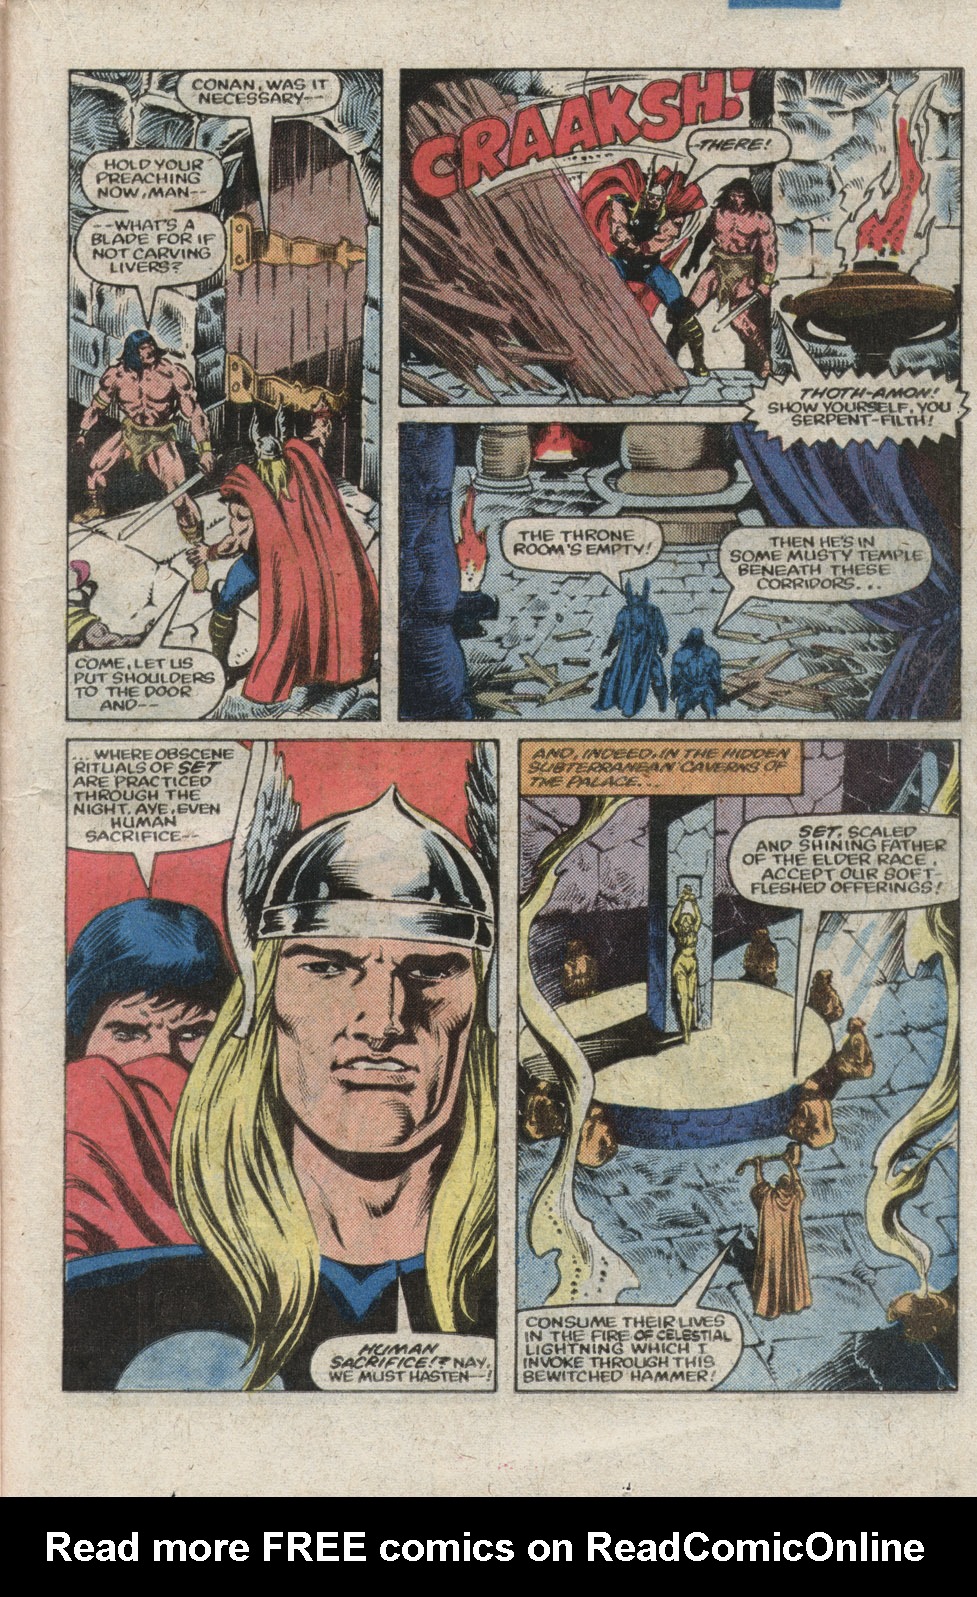 What If? (1977) issue 39 - Thor battled conan - Page 35